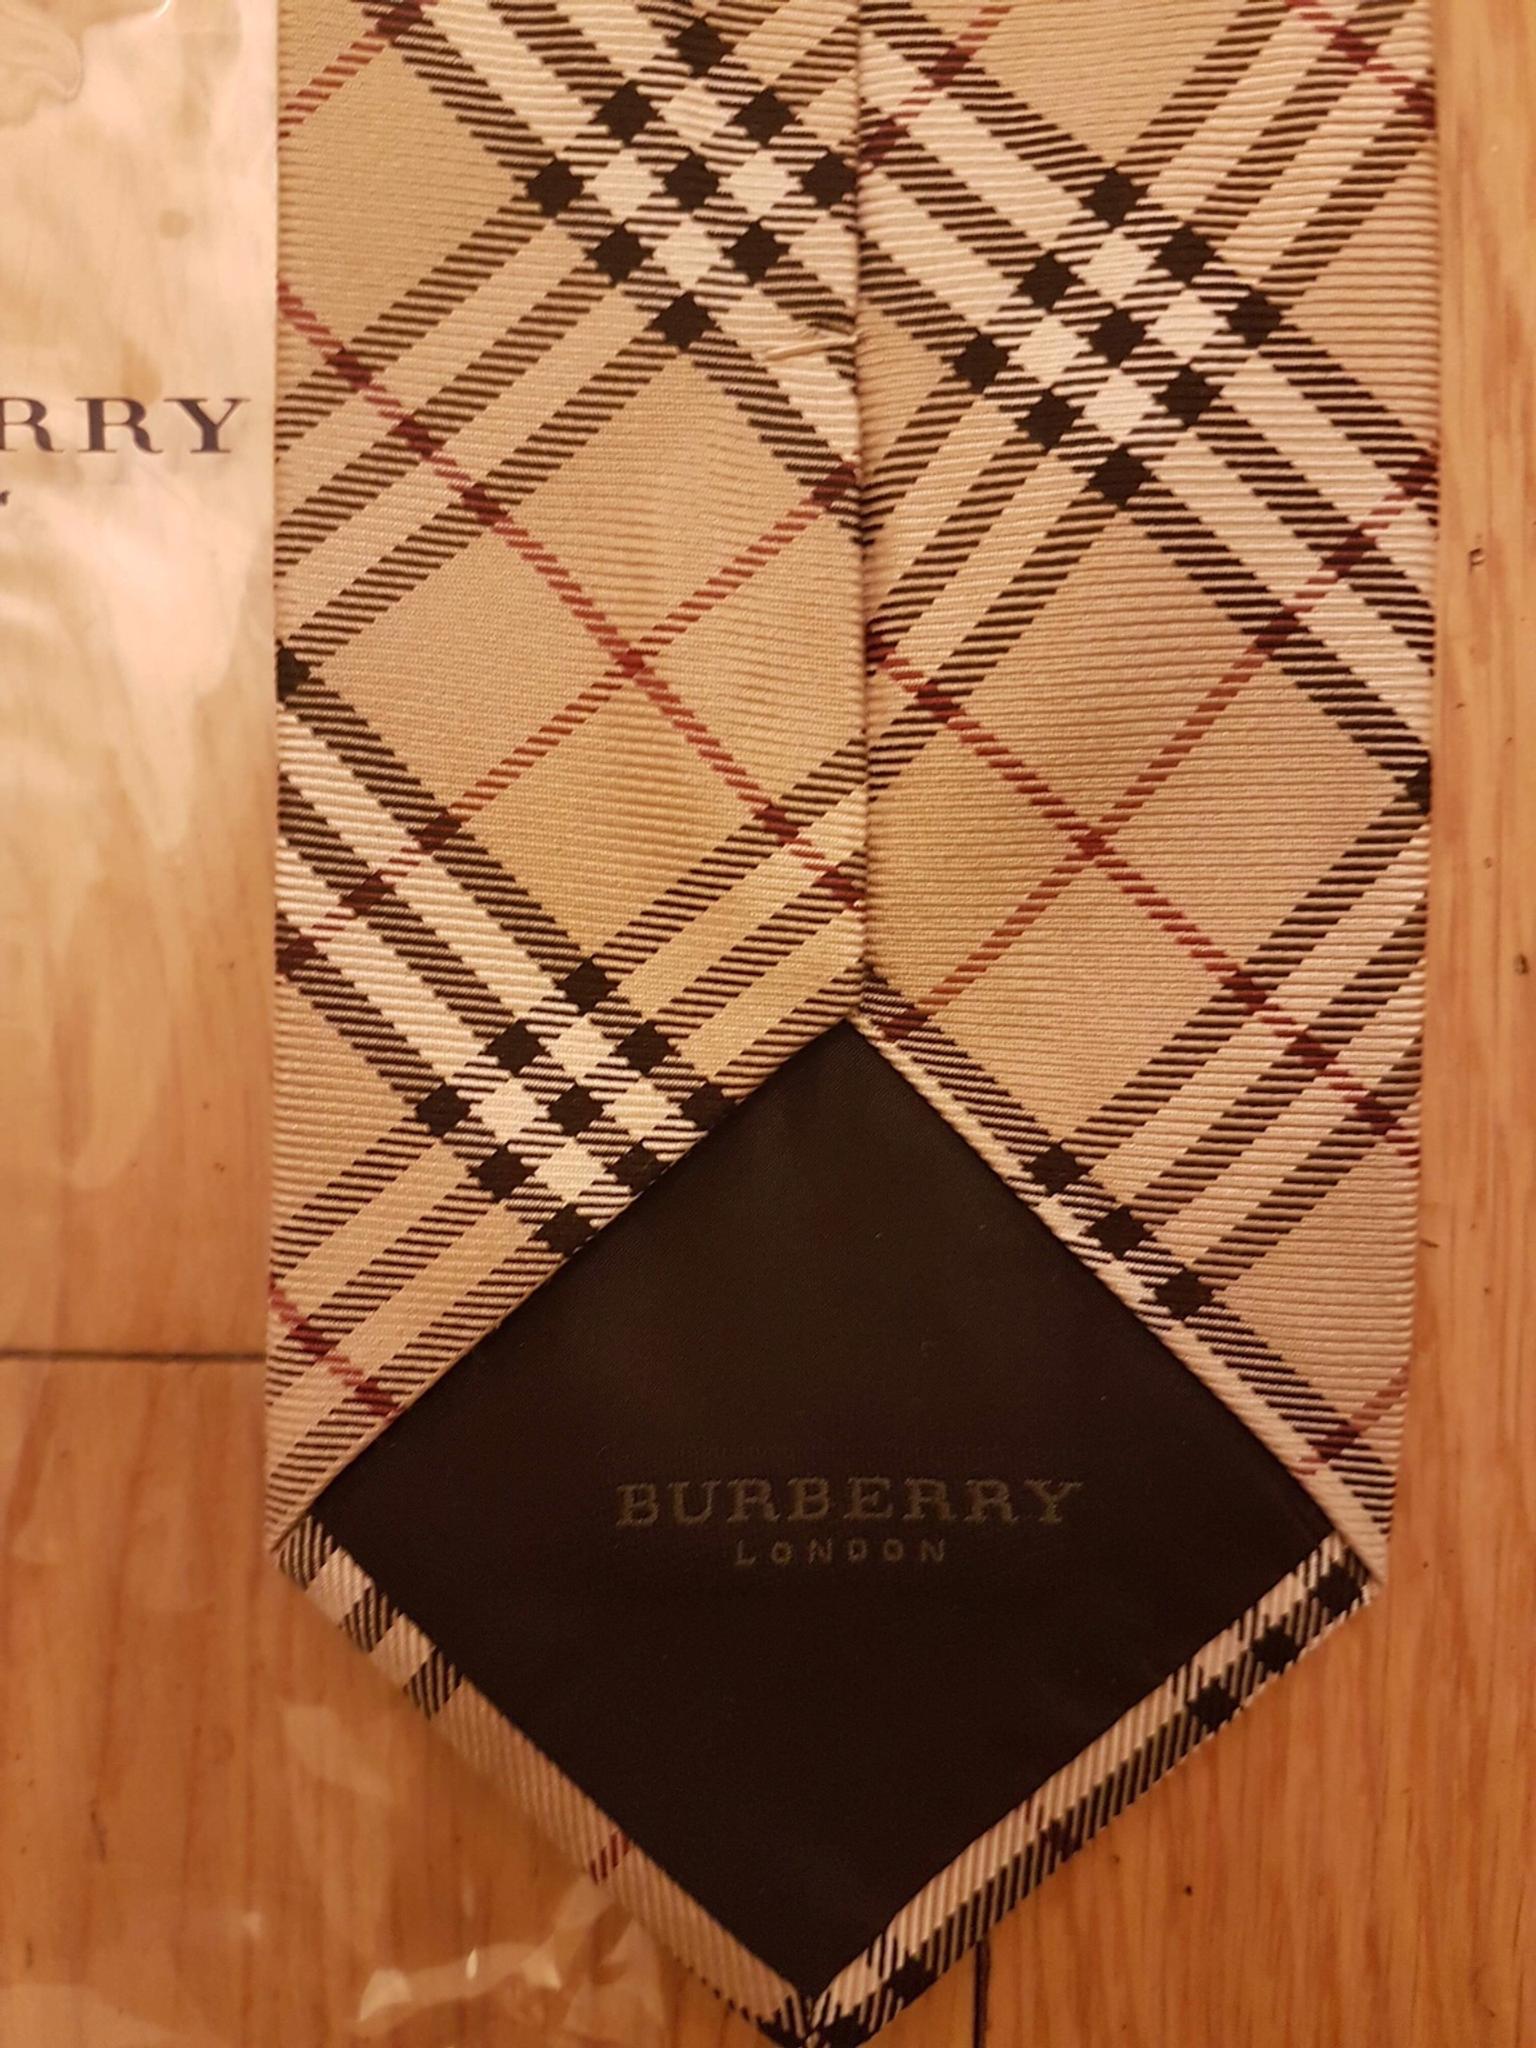 burberry london collection